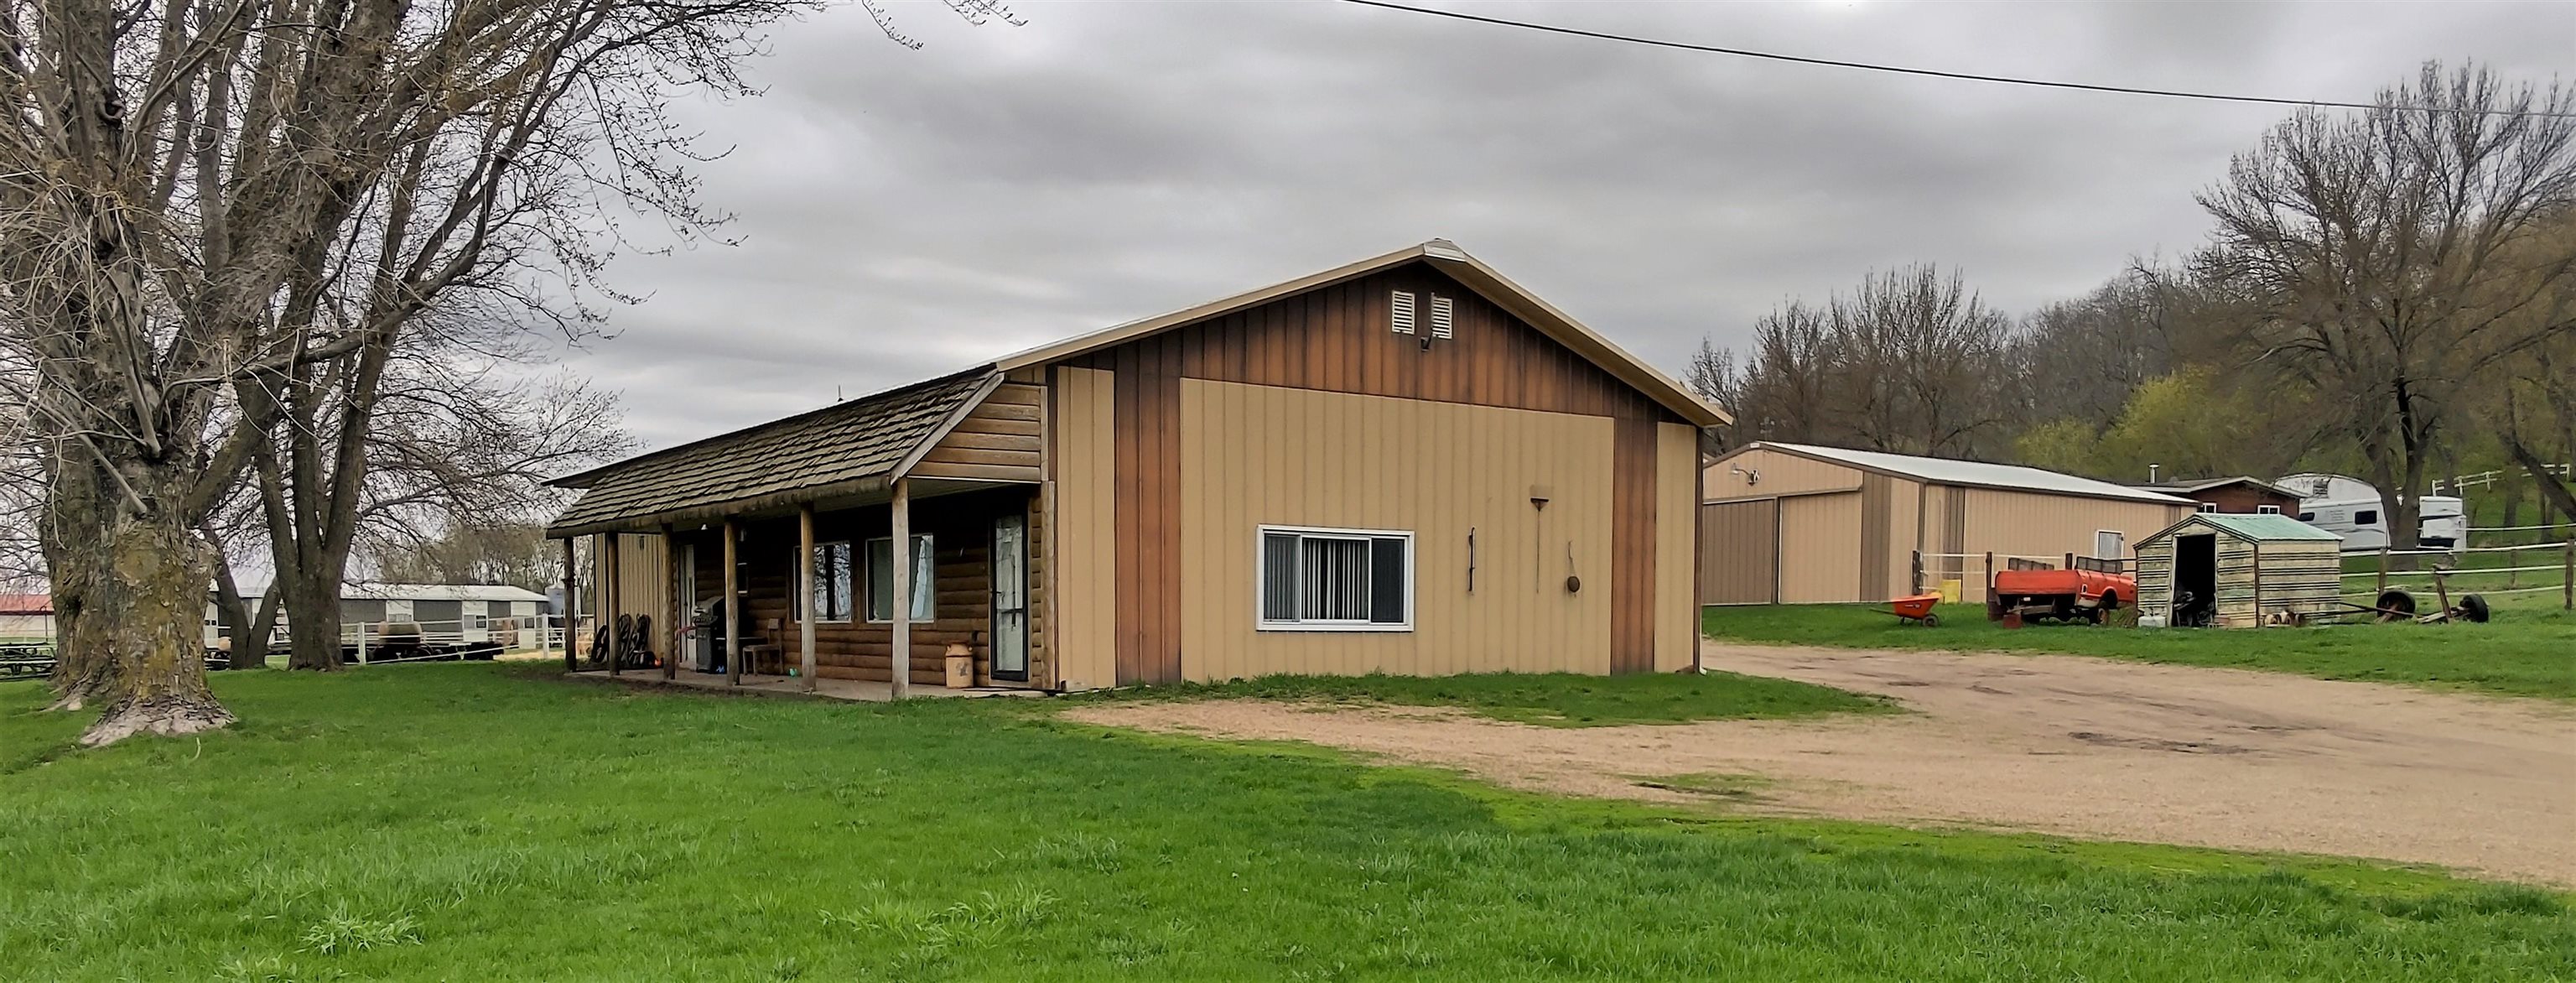 1801 380th Ave, Estherville, IA 51334 